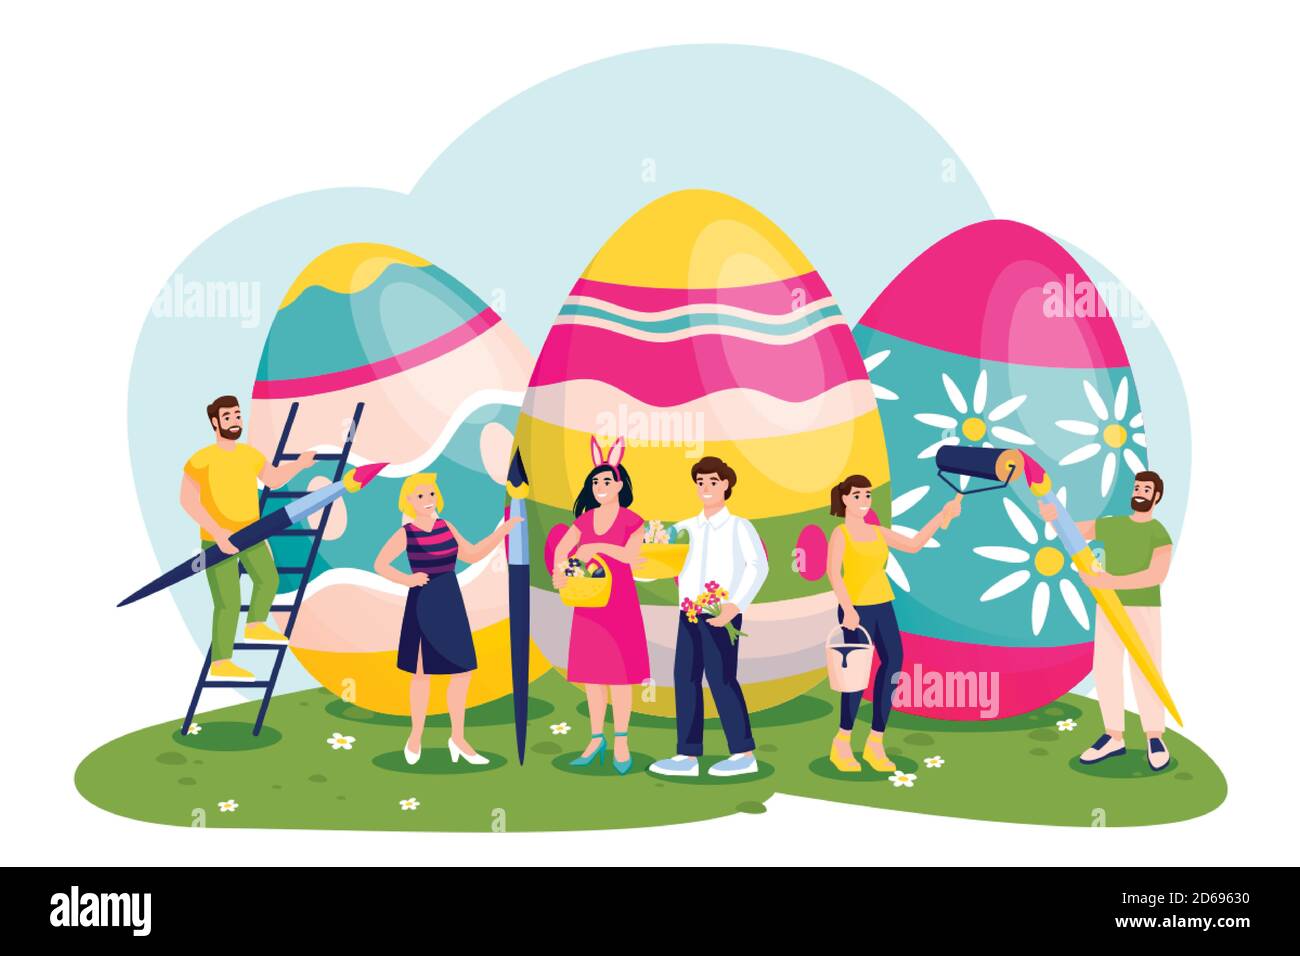 Celebrating Easter. Vector flat cartoon illustration of happy people painting Easter eggs. Traditional spring holidays design elements and characters. Stock Vector